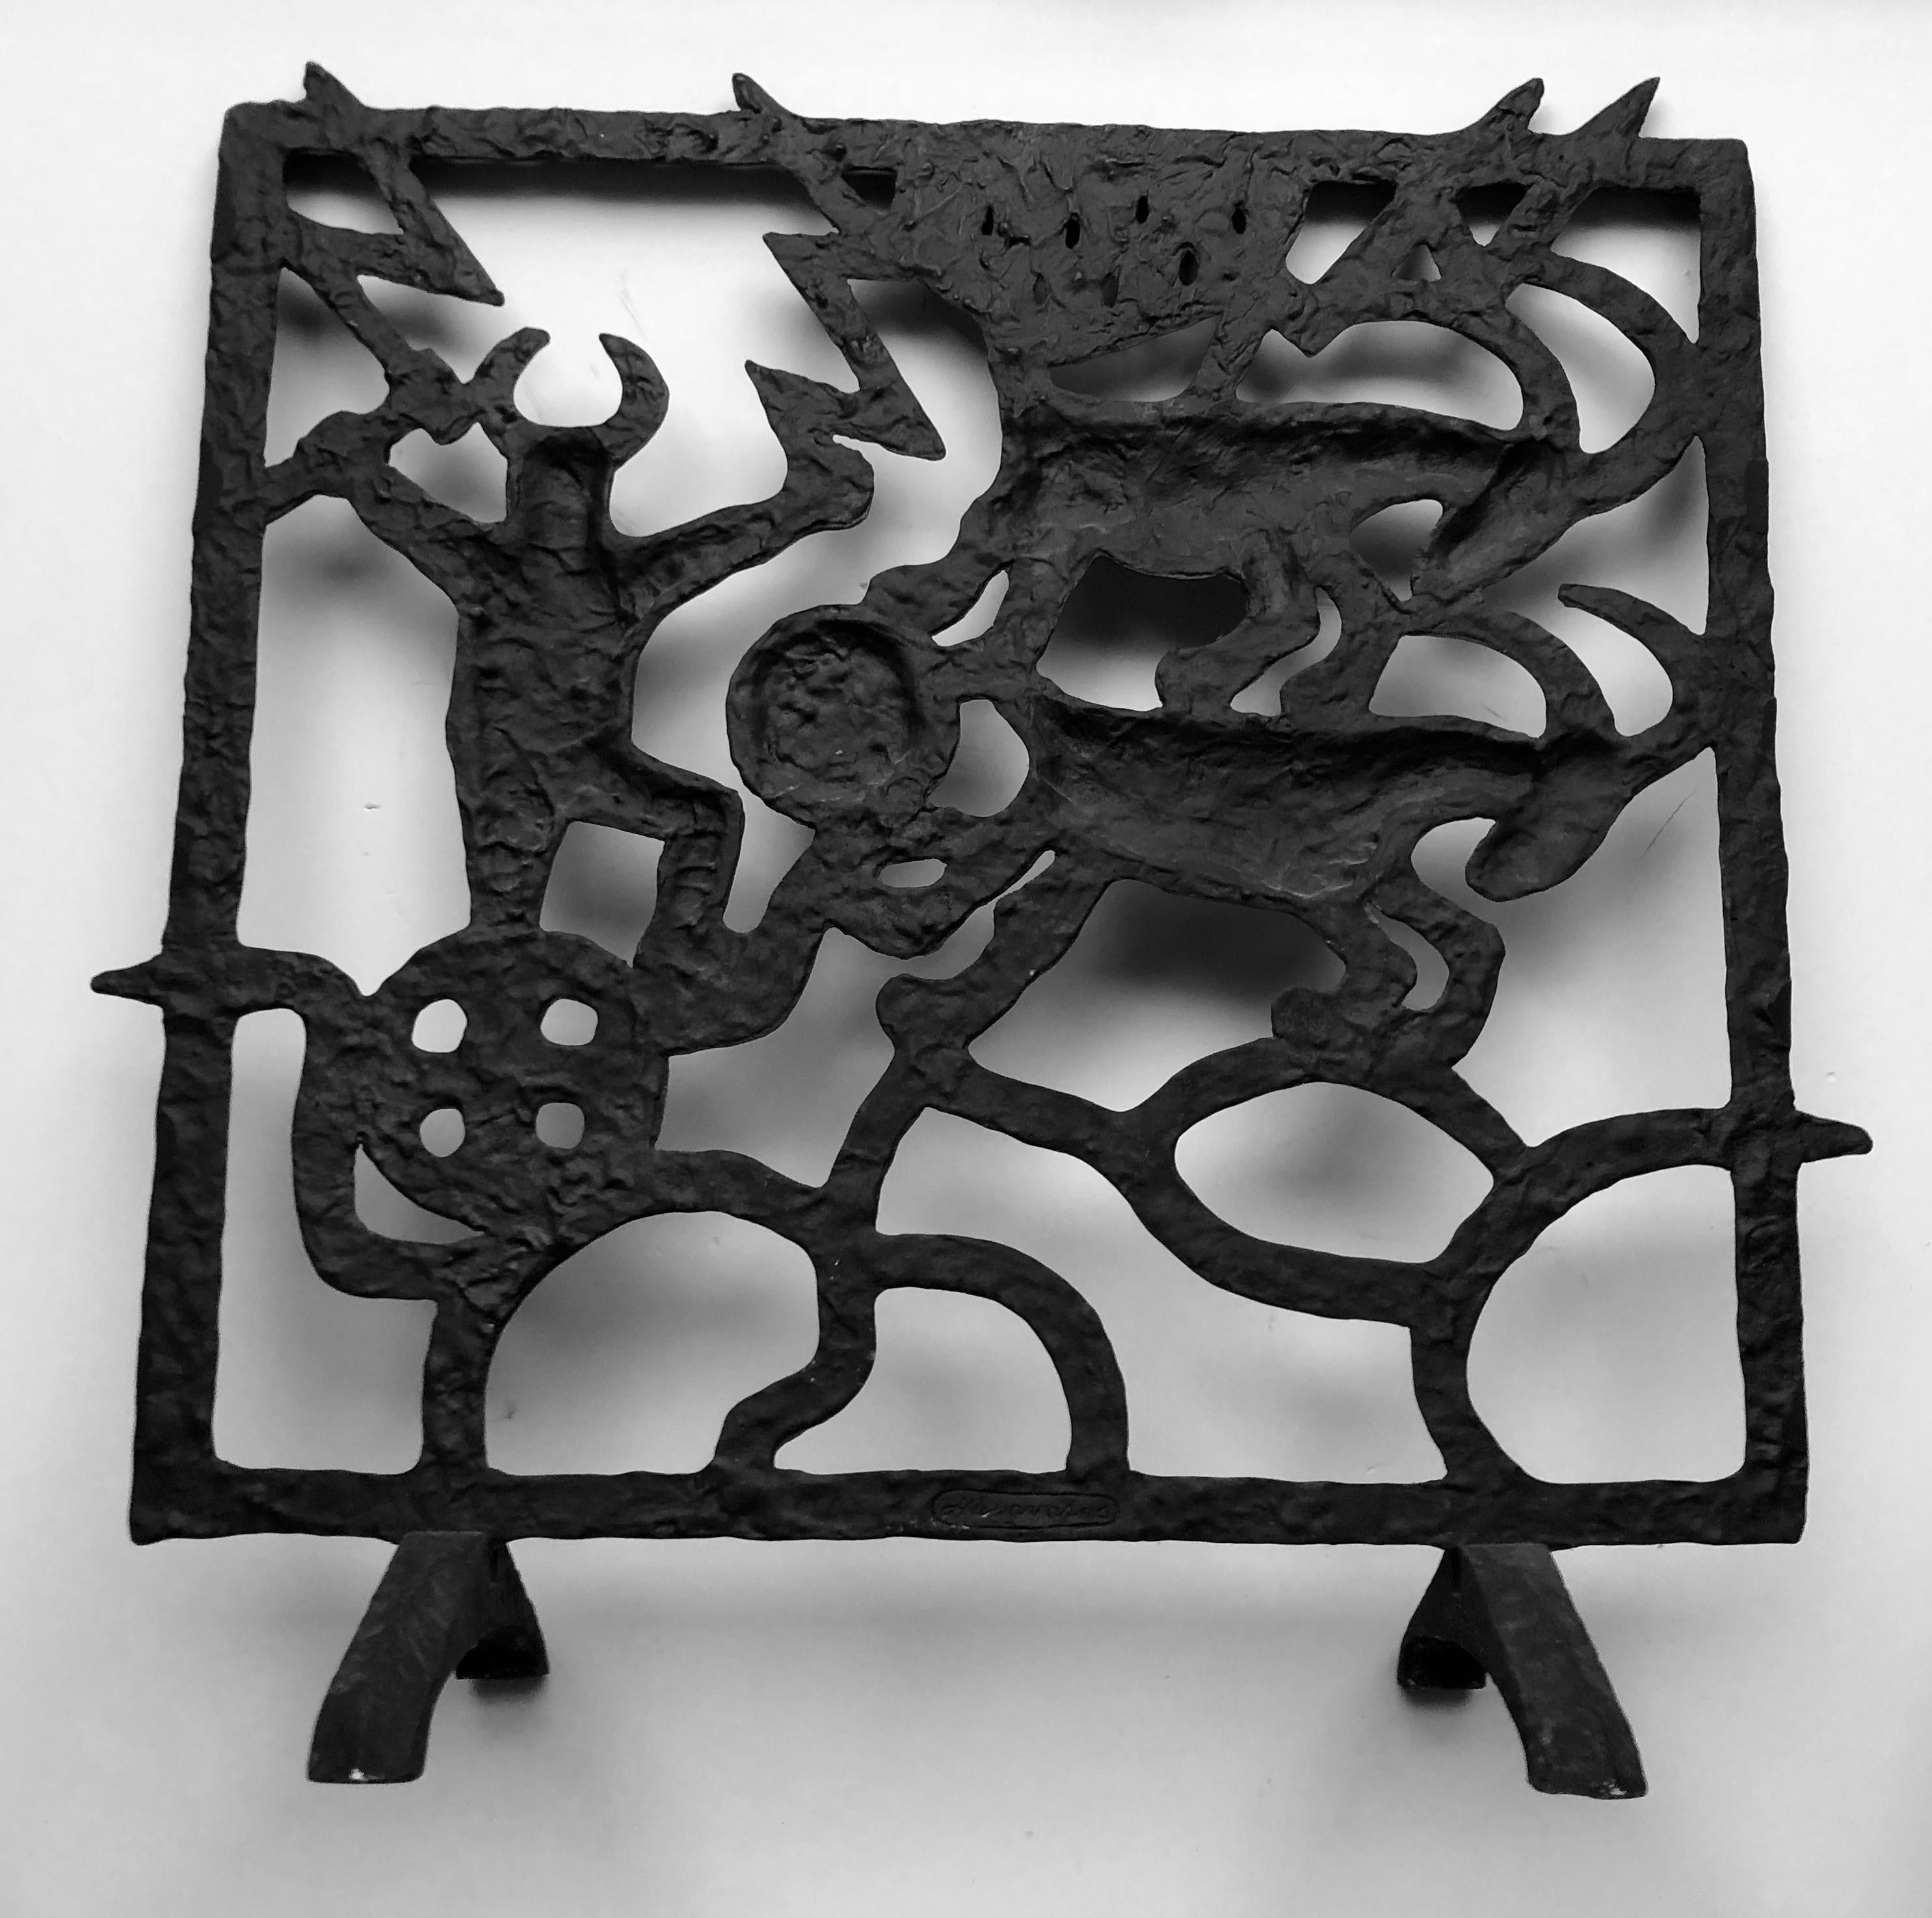 Midcentury Swedish fireplace screen by Olle Hermansson for Husqvarna. Note. This screen is wall-mounted, unlike the freestanding ones. A cast iron fireplace with a theme from the nordic mythology. We can see Thor (Tor) and his running goats and the